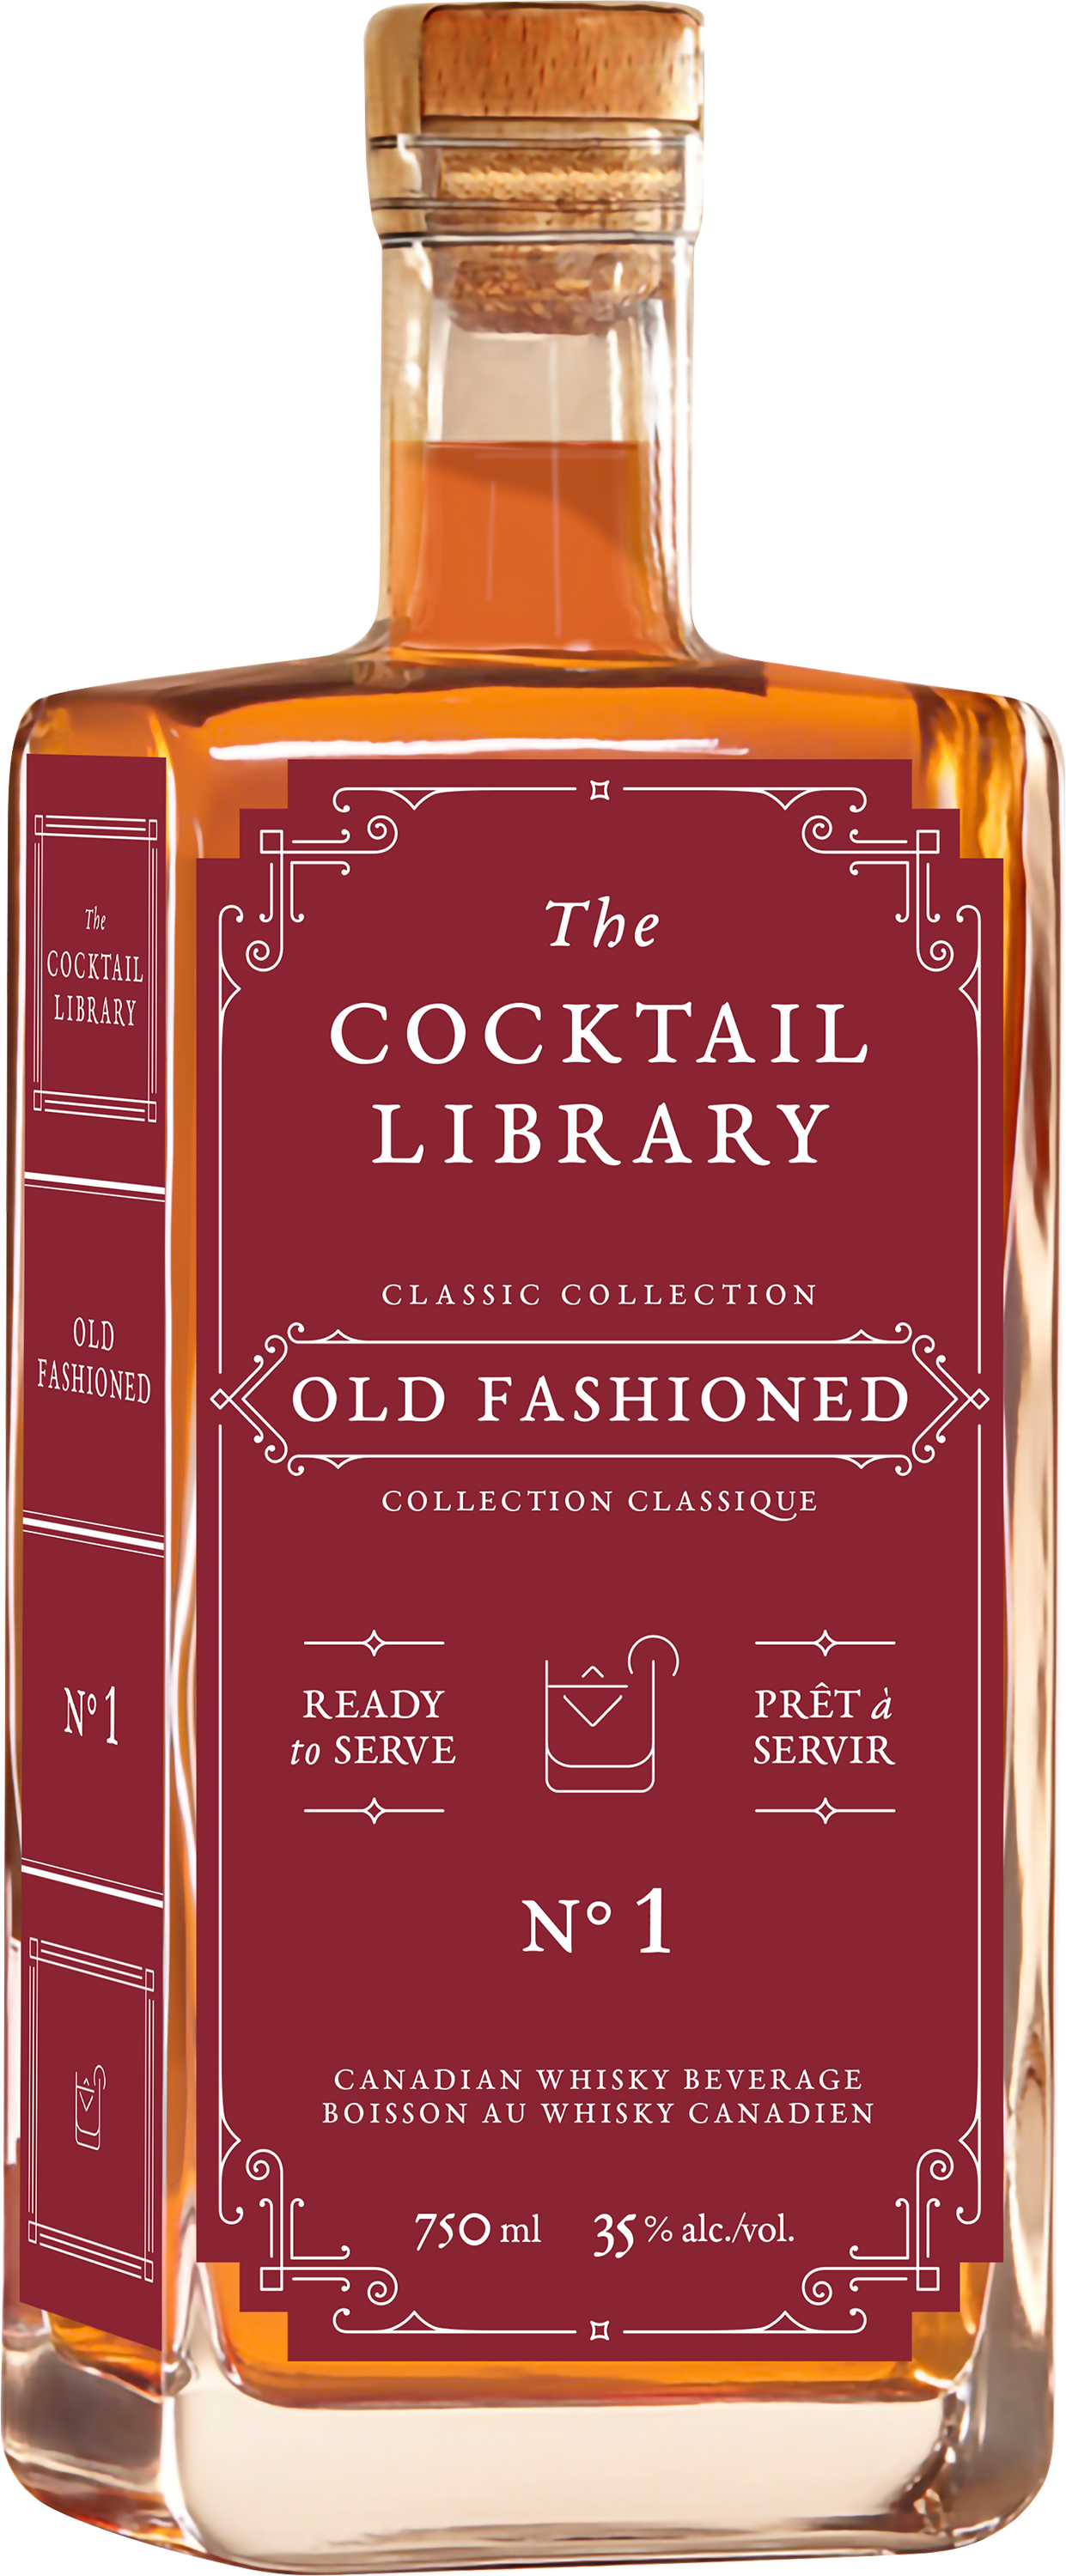 The Cocktail Library Old Fashionned